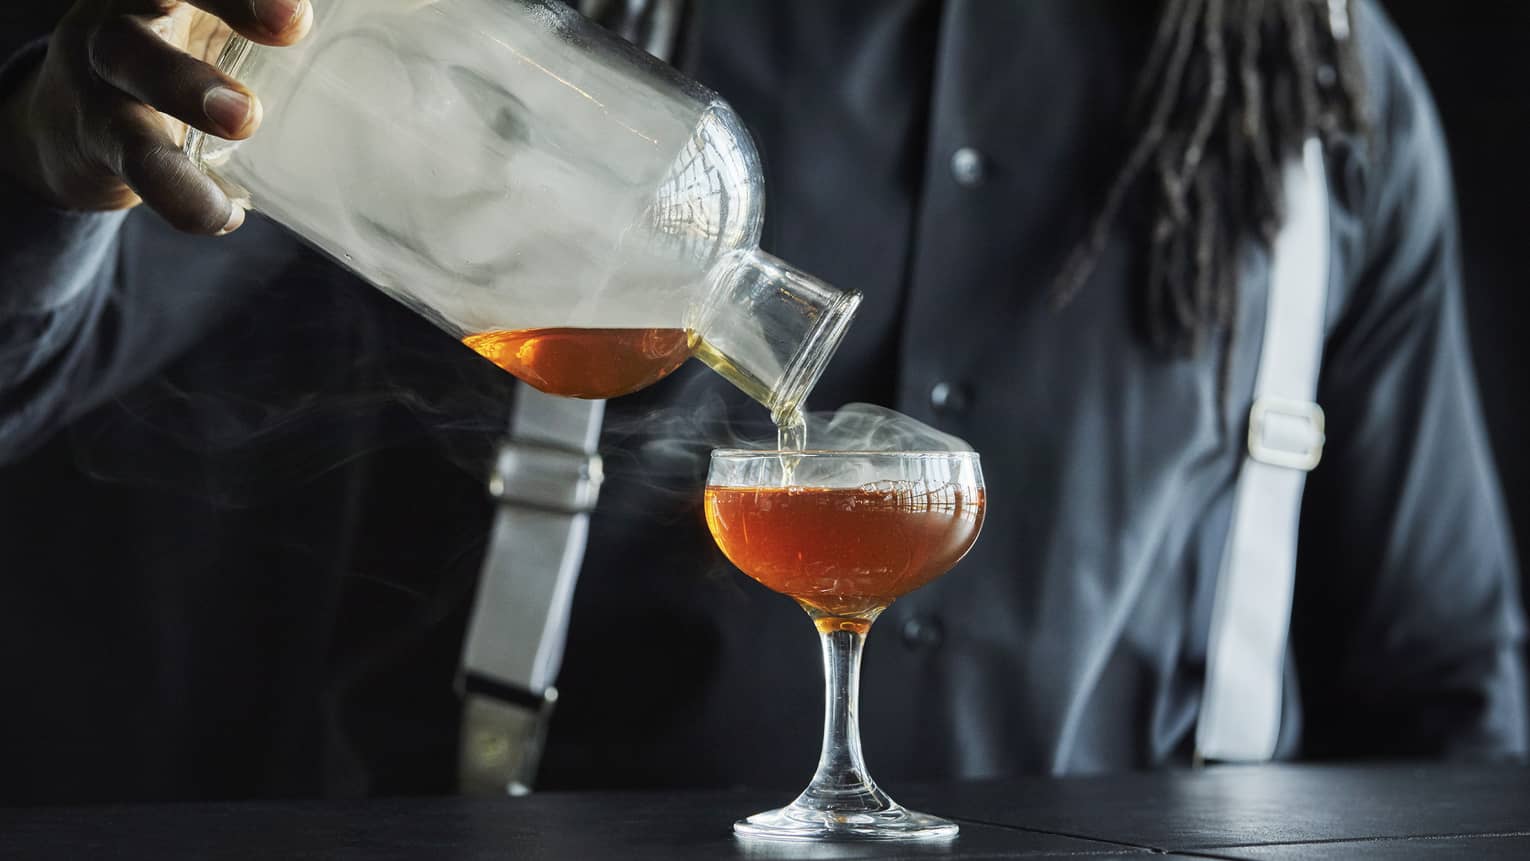 Smoke rolls off the decanter as a Four Seasons staff member pours bourbon into a coupe glass